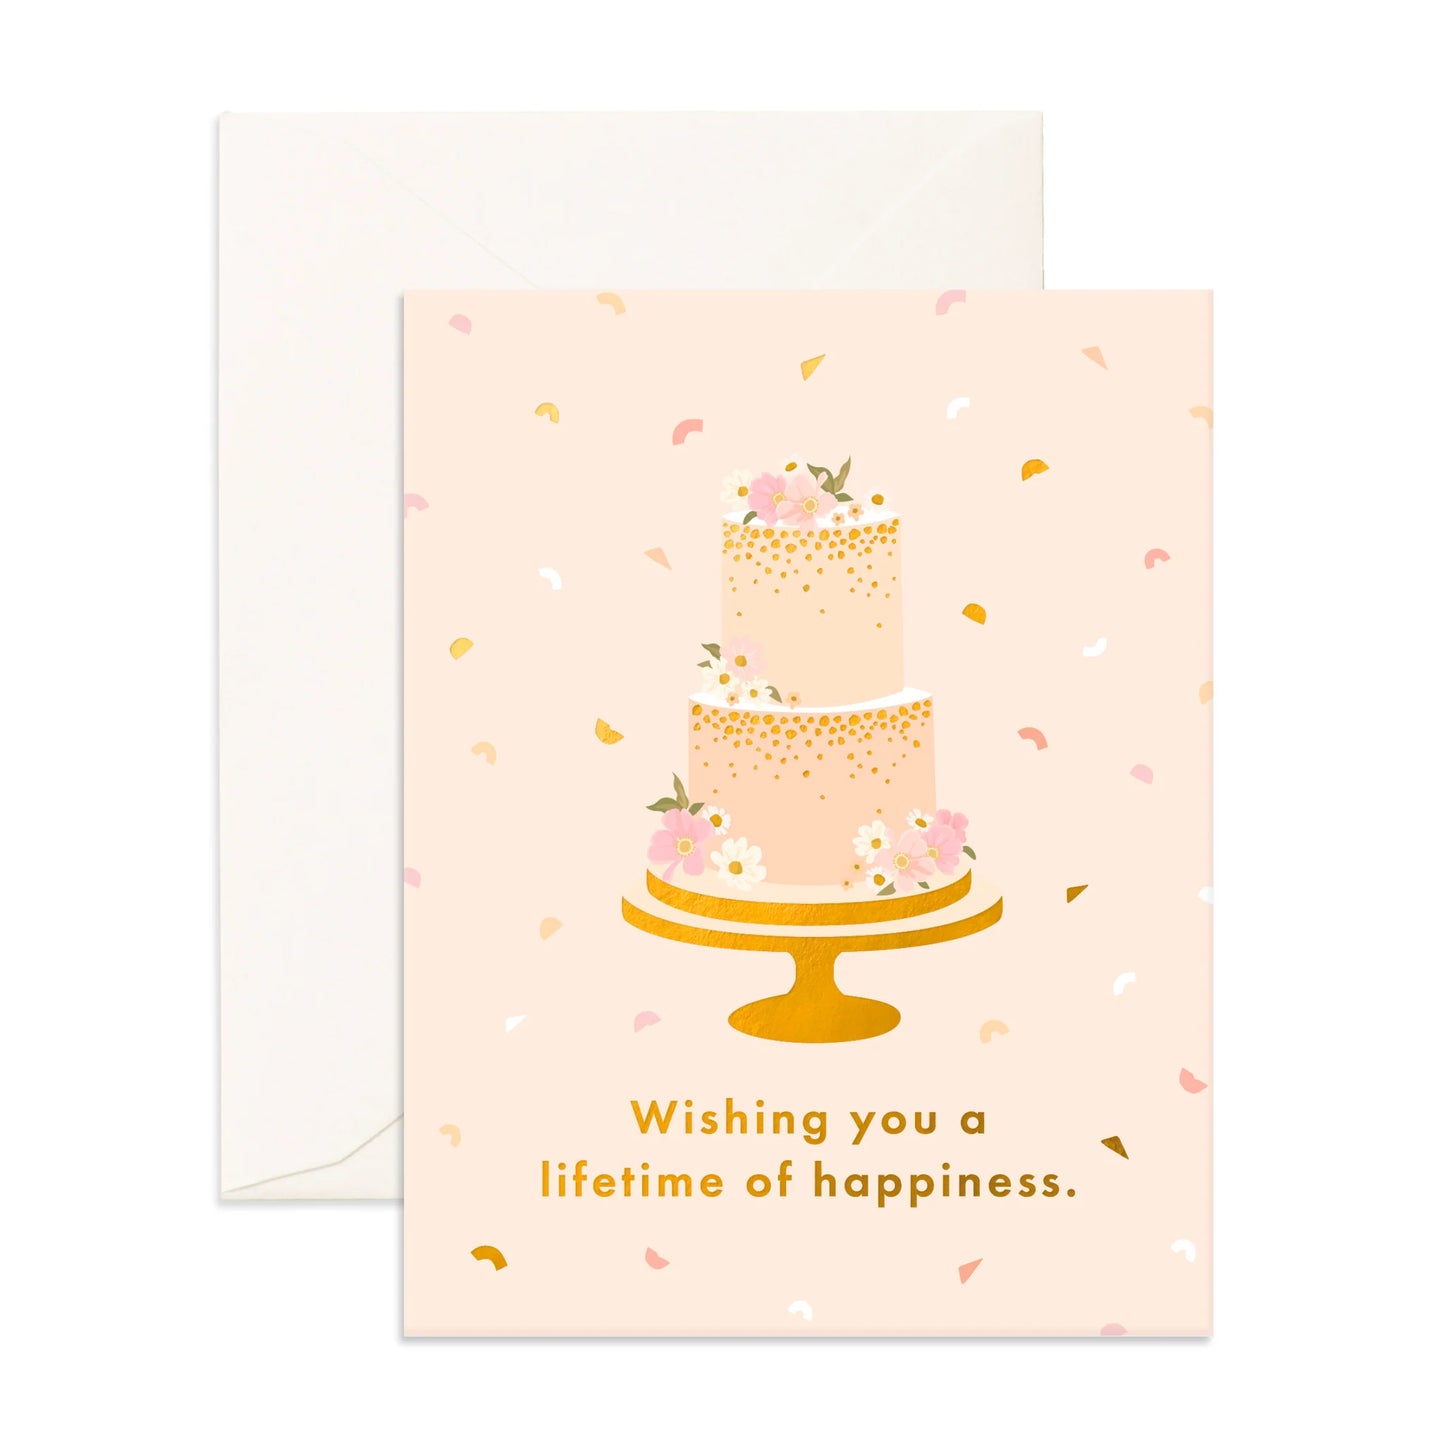 Fox & Fallow - Lifetime of Happiness Greeting Card